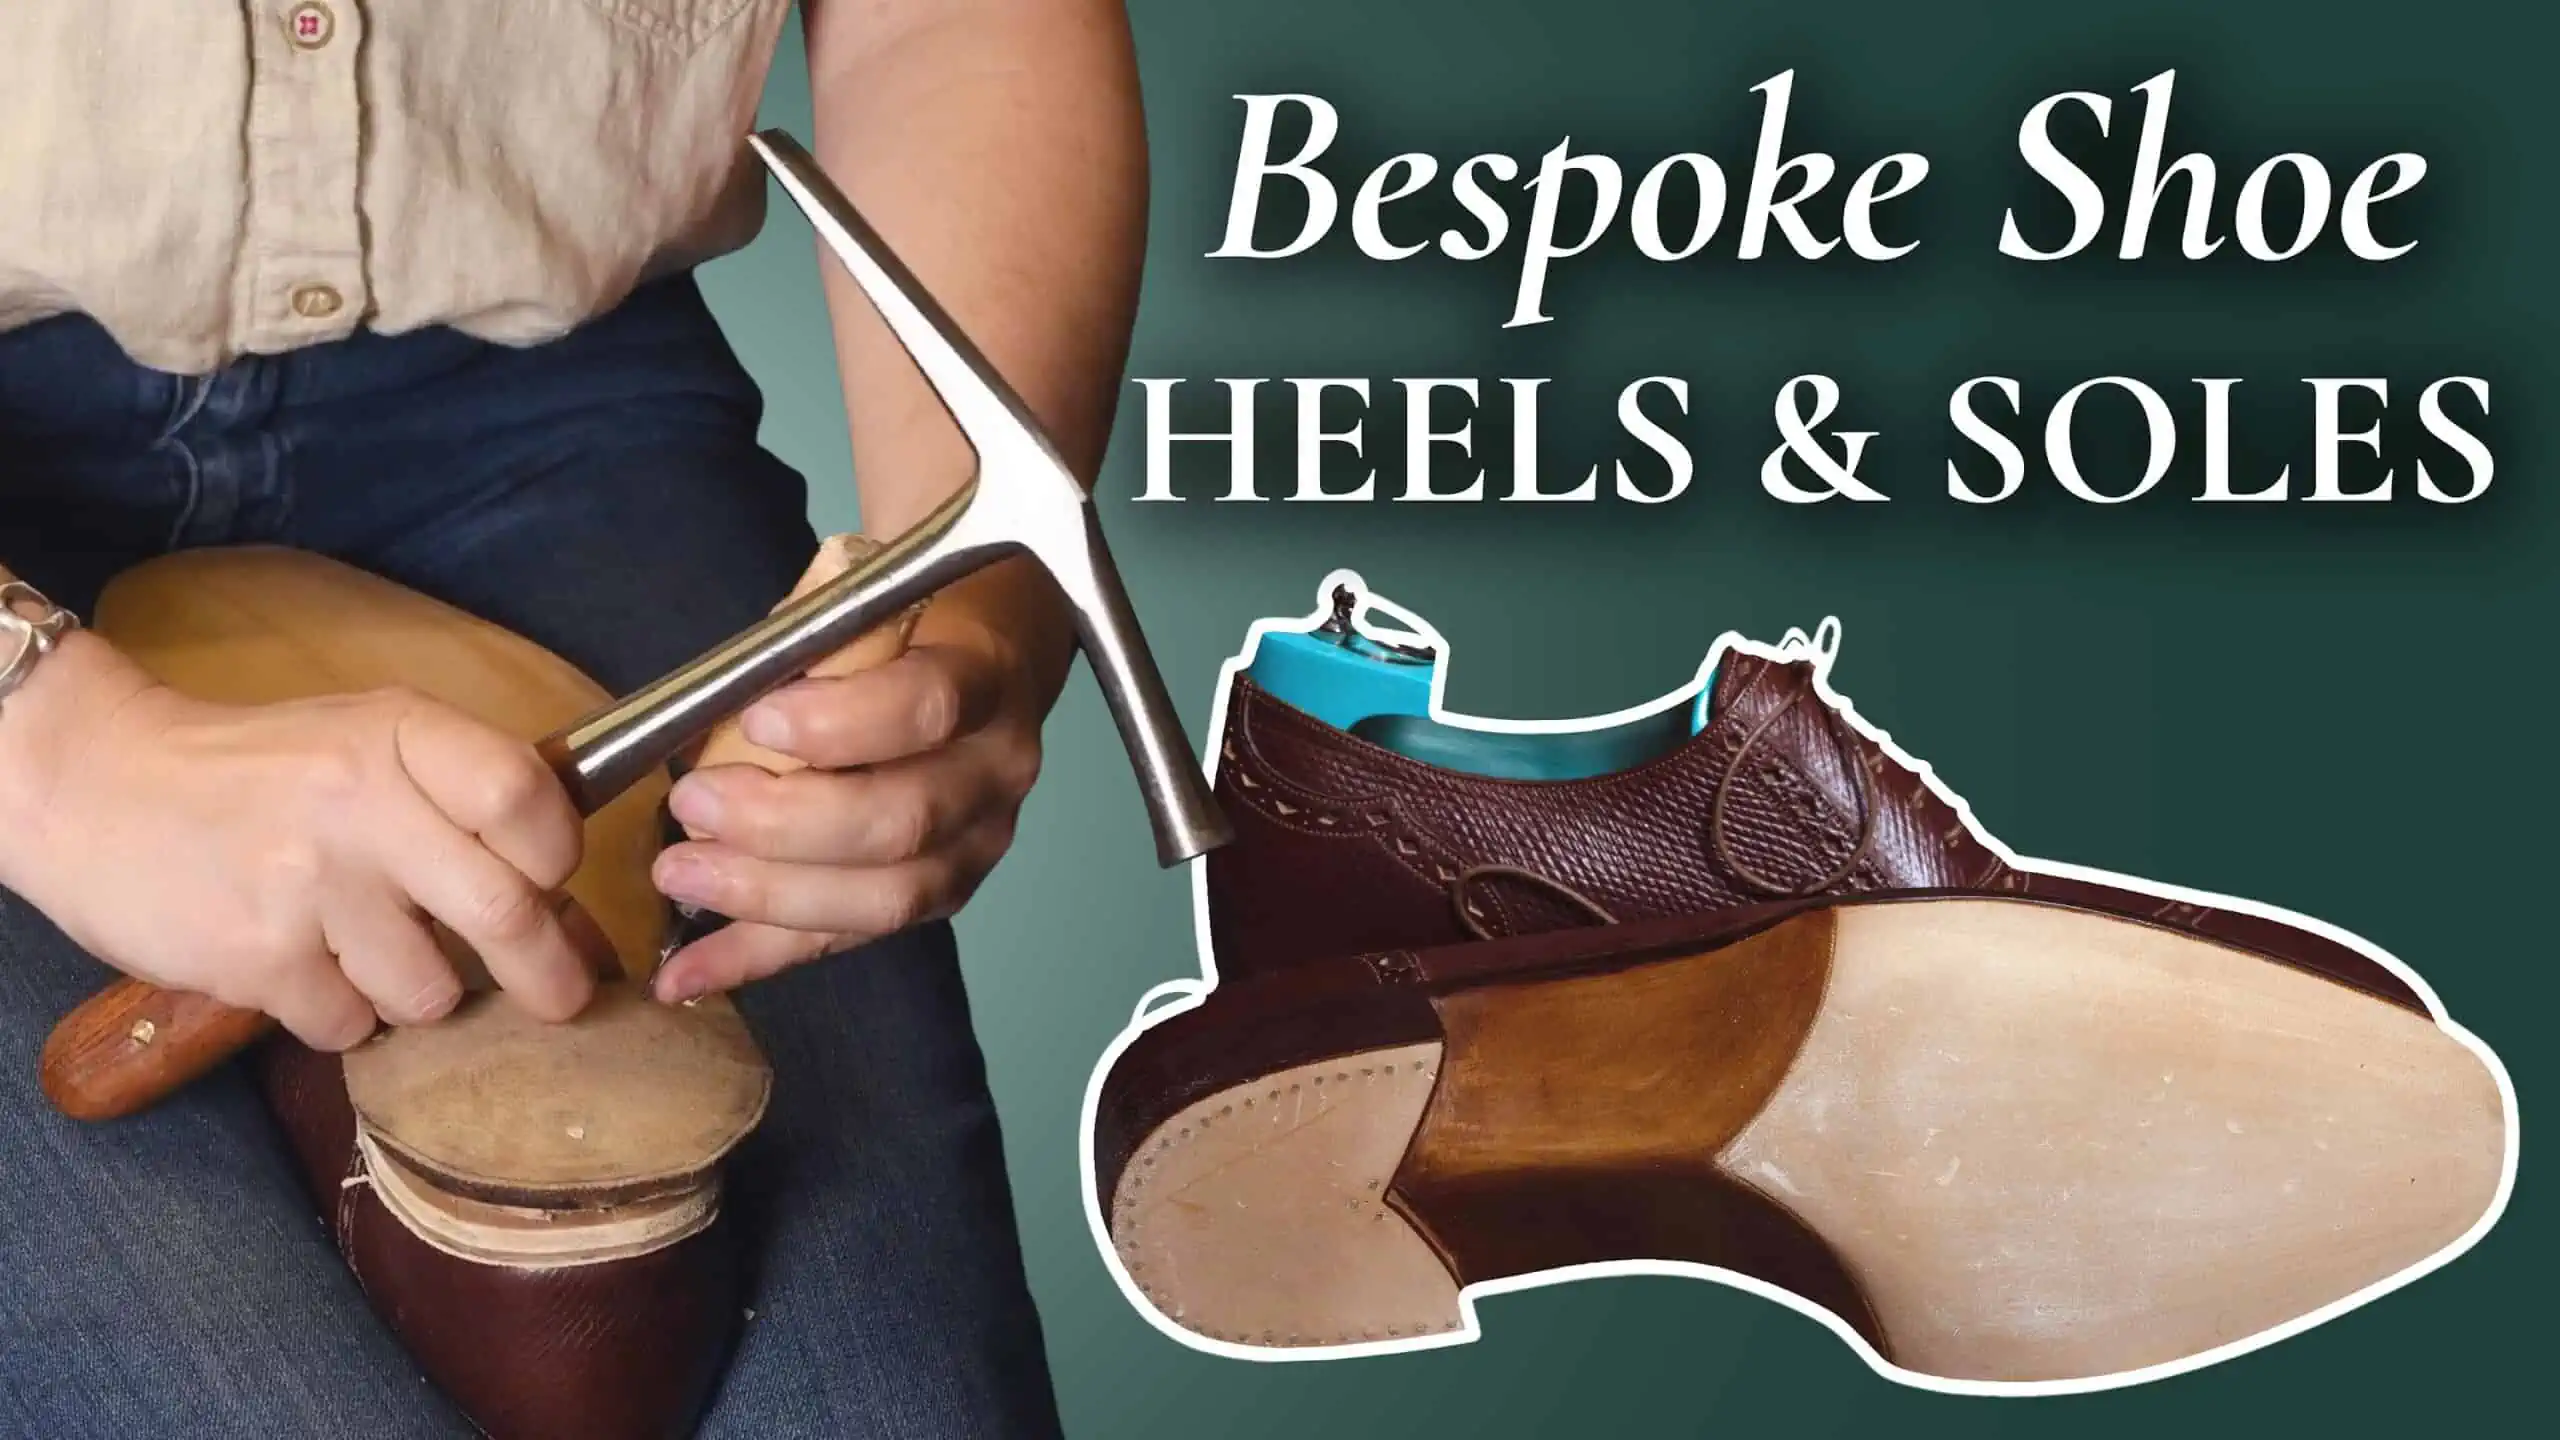 Building Heels & Shaping Soles For Handmade Bespoke Shoes